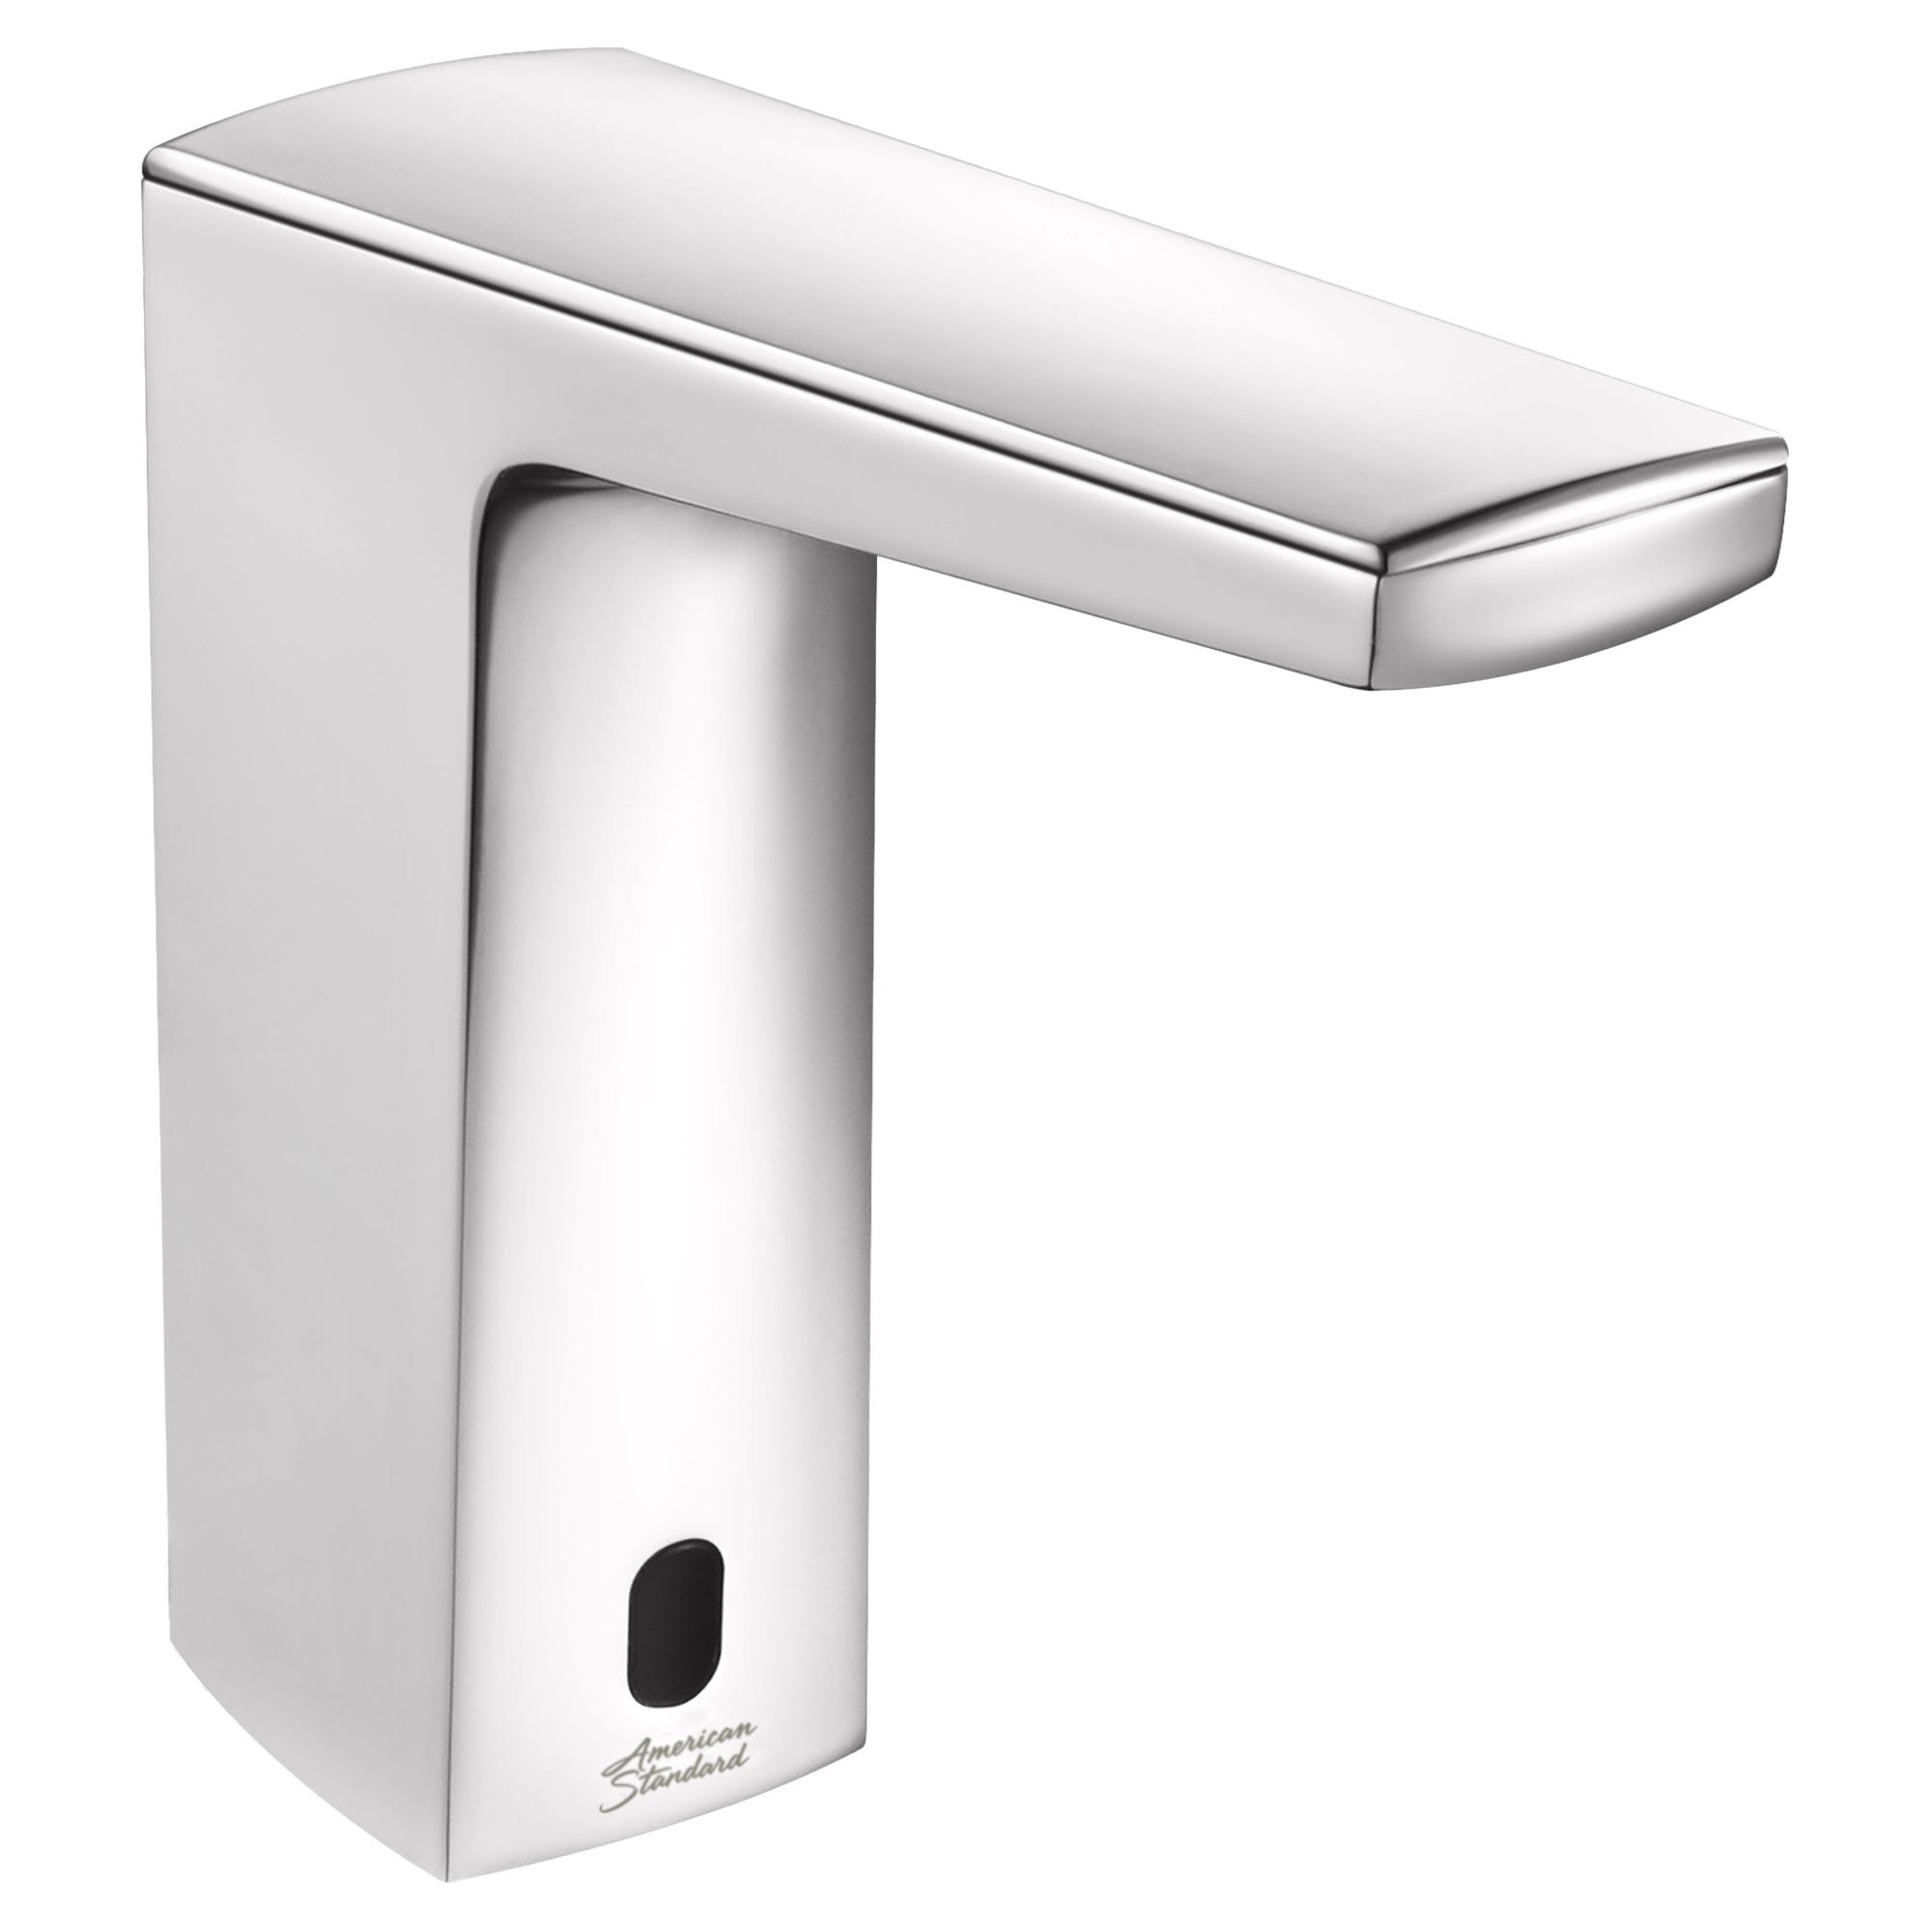 Paradigm Selectronic Touchless Faucet Battery Powered With SmarTherm Safety Shut Off  Plus  ADM 05 gpm 19 Lpm CHROME